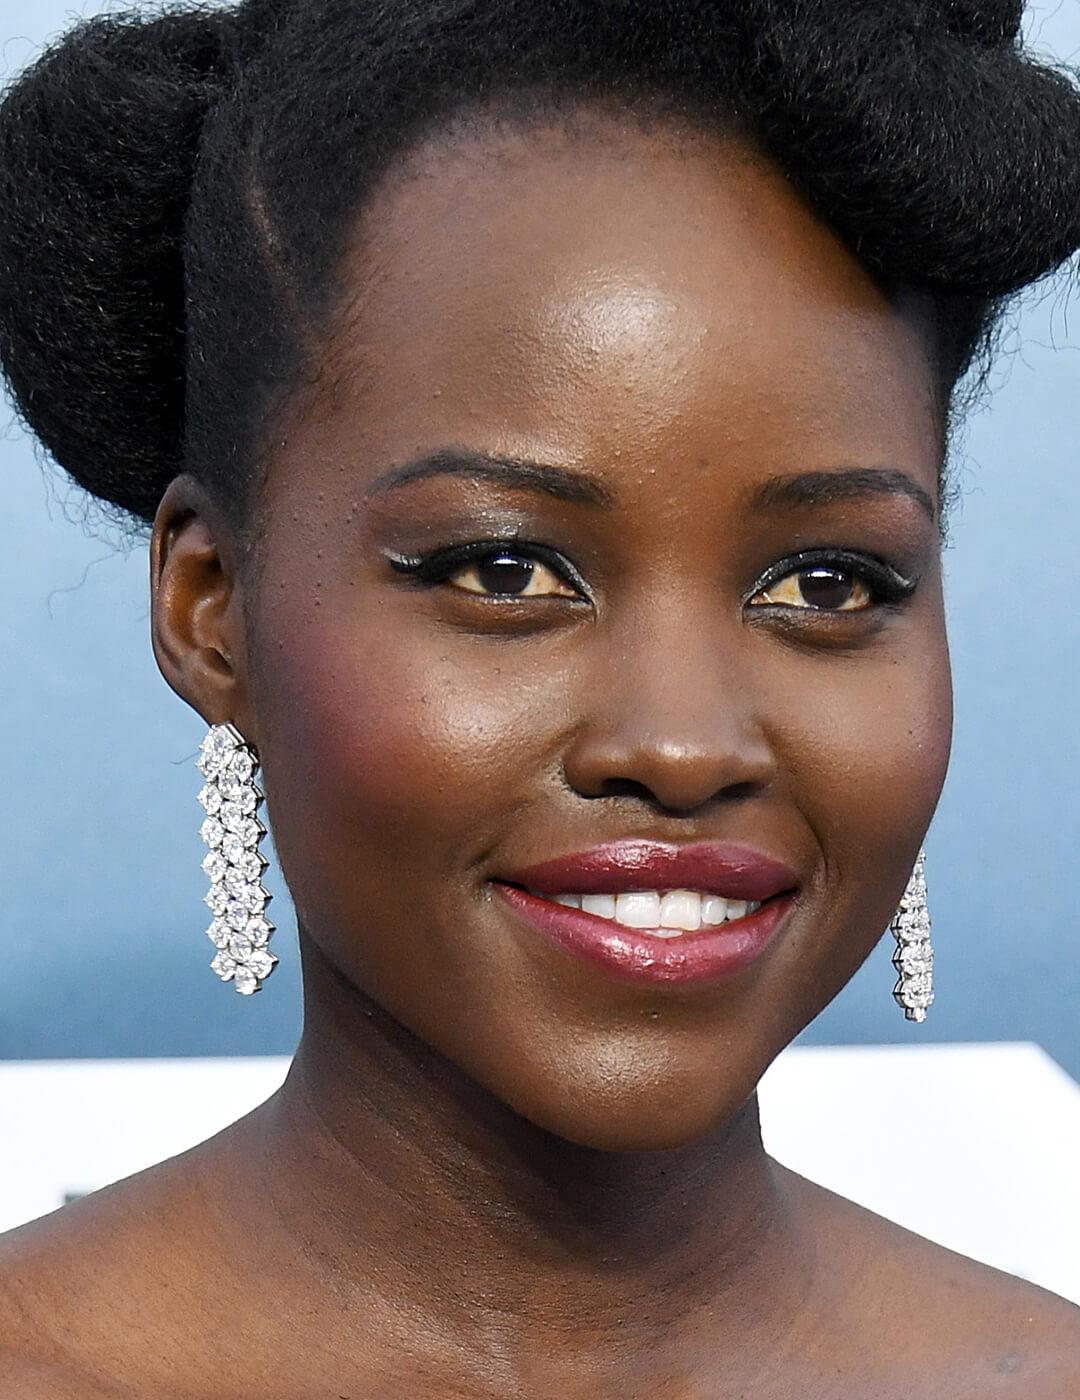 Lupita Nyong'o rocking silver dangling earrings, black and white eye makeup look, and glossy nude pink lips